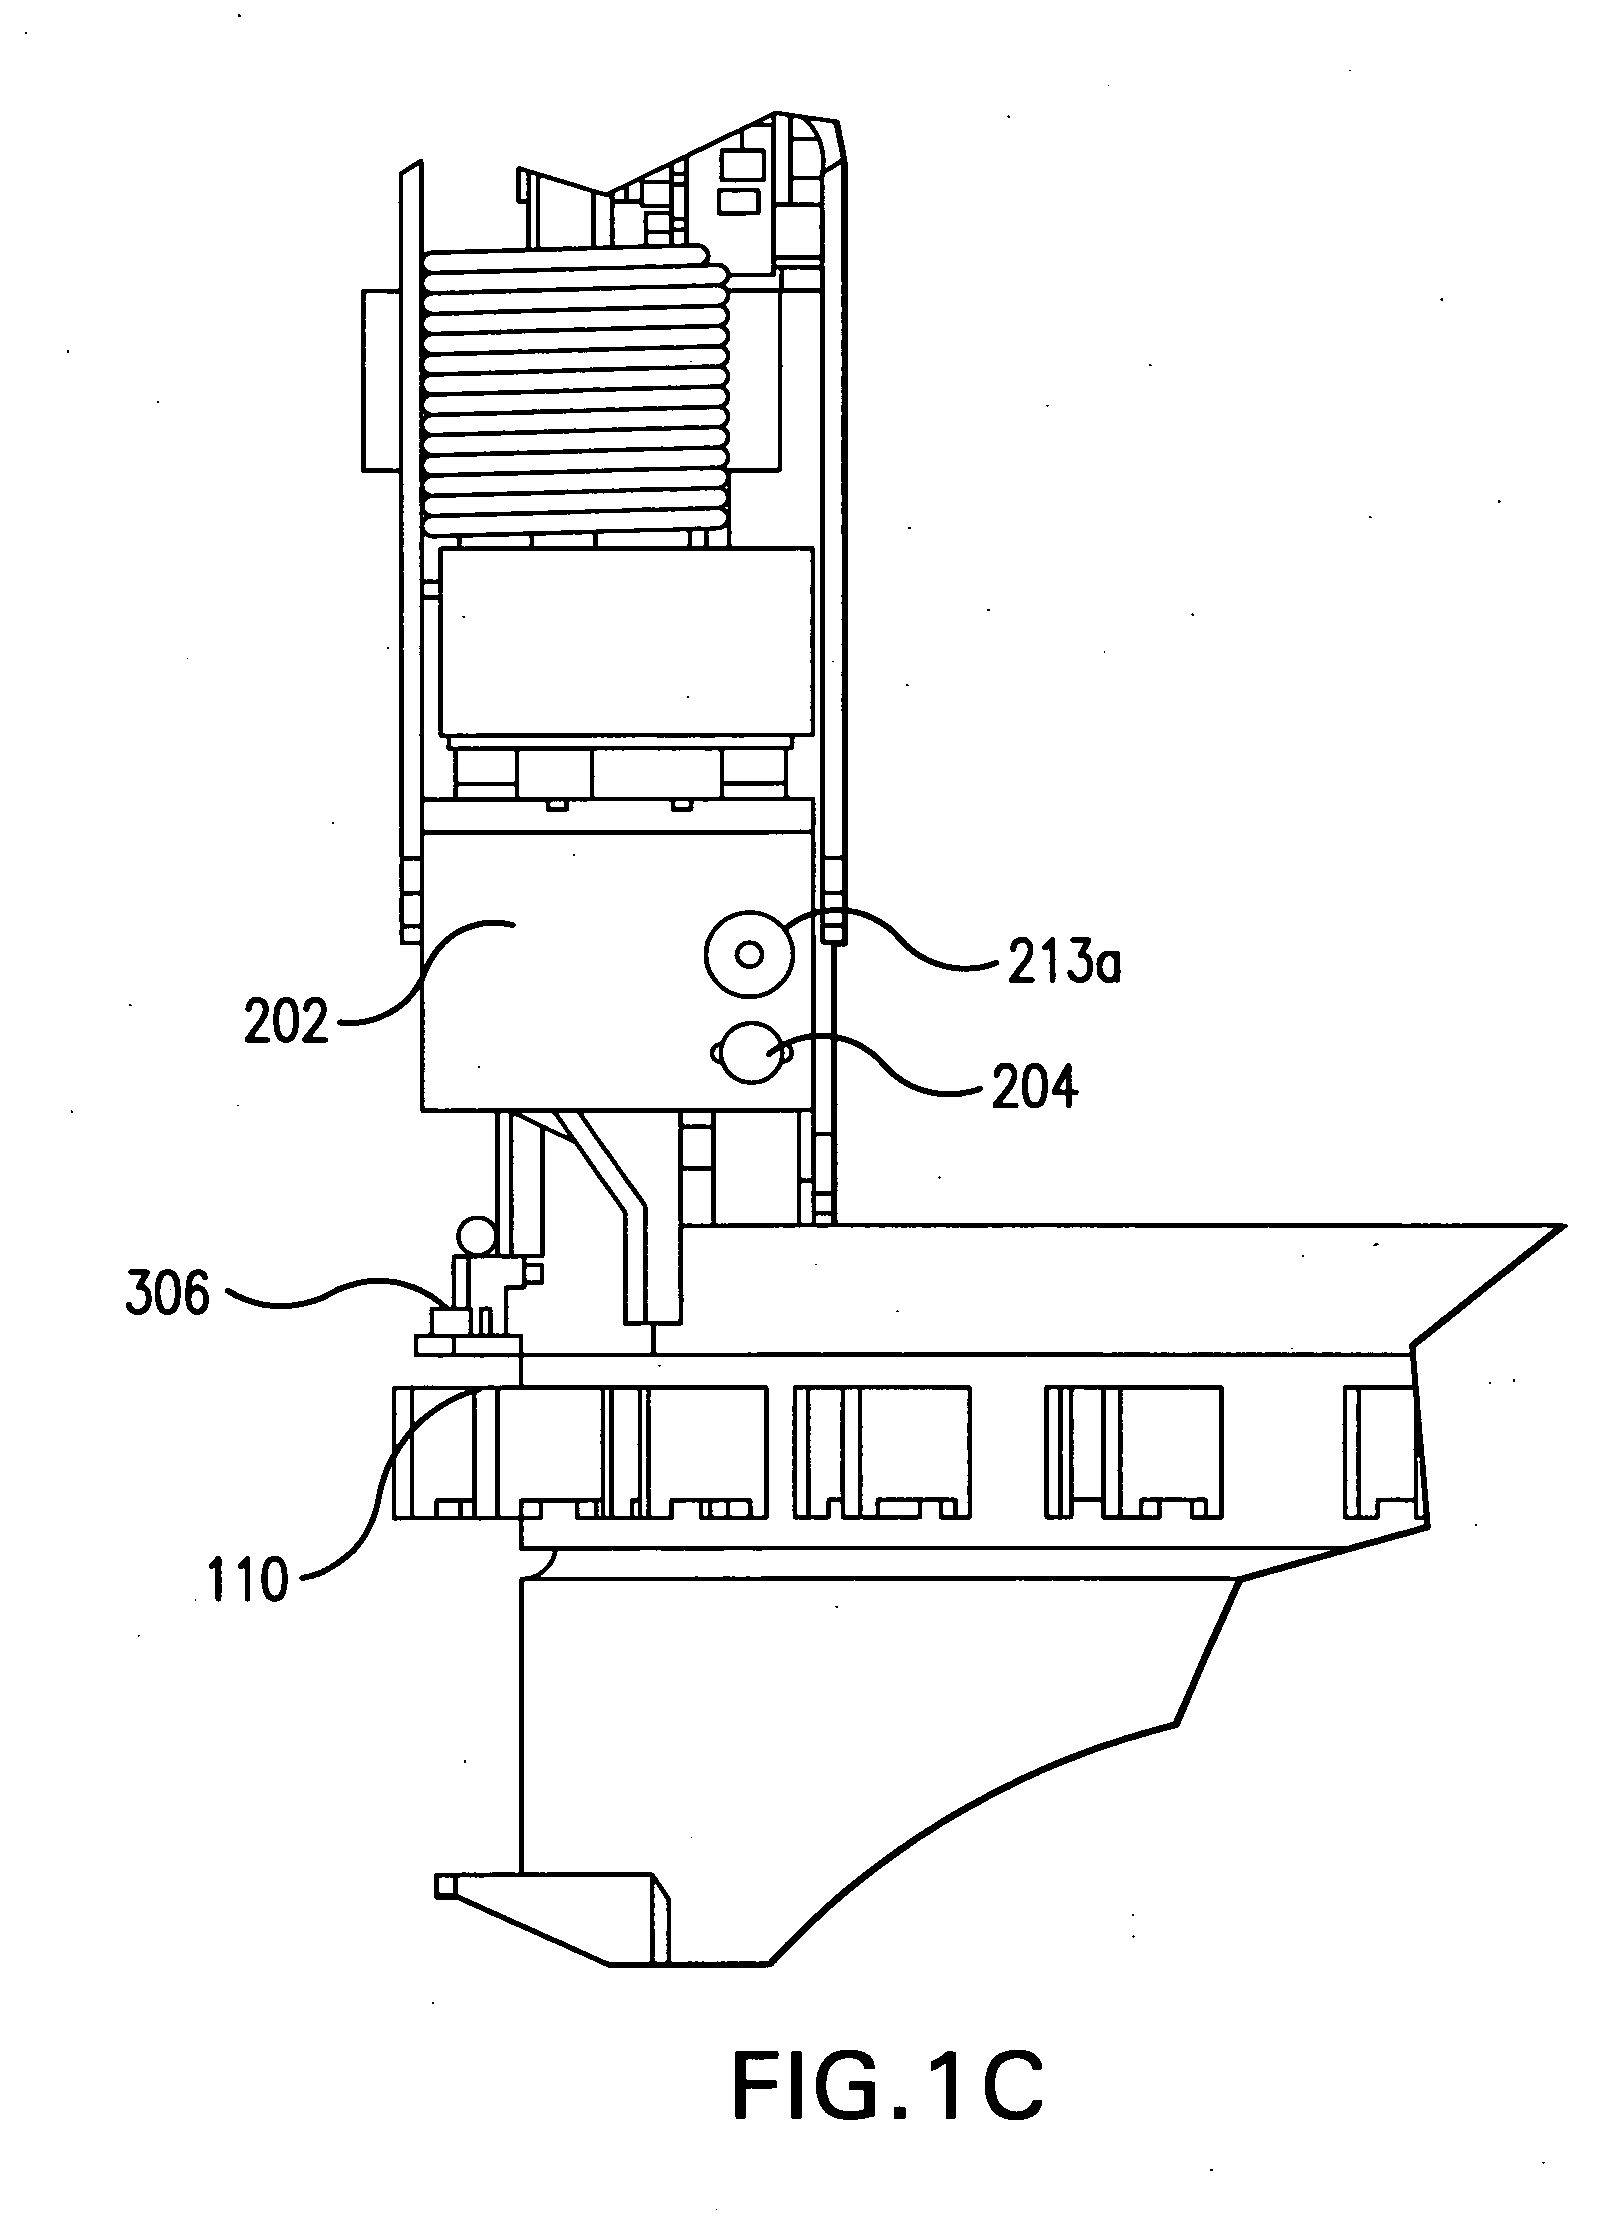 Apparatus and method for inspecting areas surrounding nuclear boiling water reactor core and annulus regions